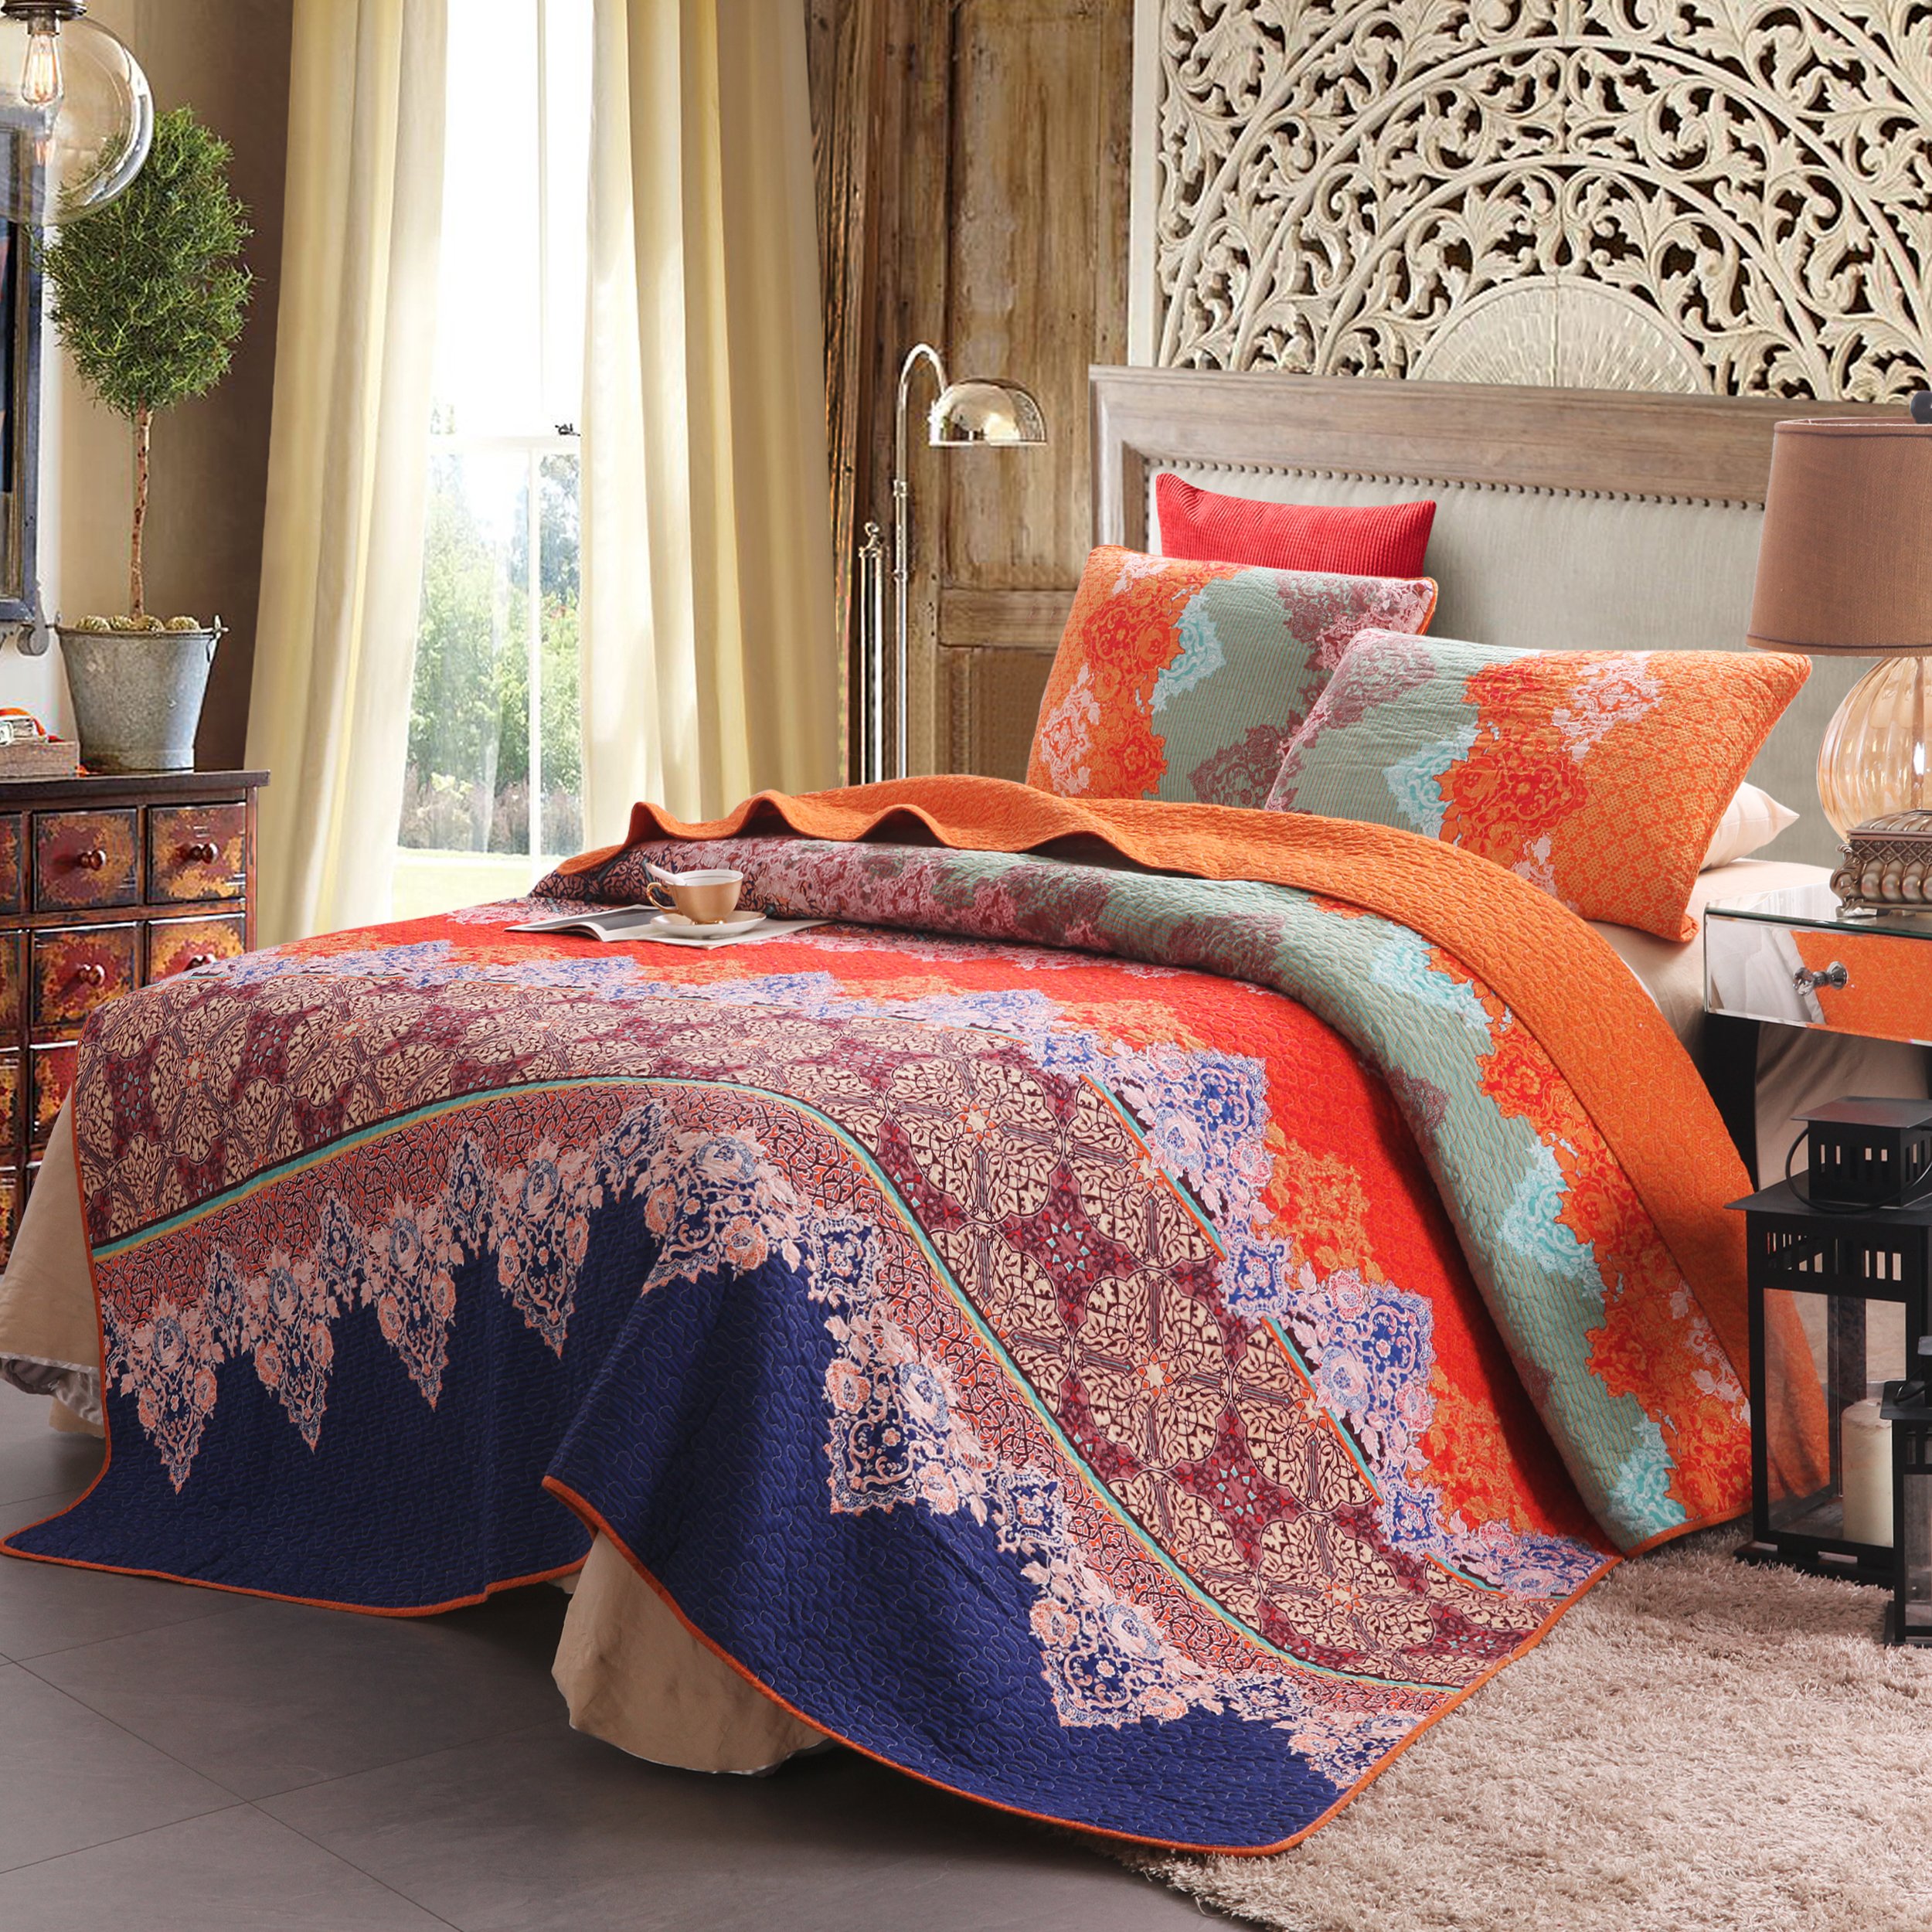 Book Cover Exclusivo Mezcla Cotton Boho Twin Size Quilt Set, Soft Reversible Bohemian Bedspreads Lightweight Bedding Set Bed Cover for All Seasons, 2 Piece (1 Quilt, 1 Pillow sham) Orange and Navy Twin Set (68